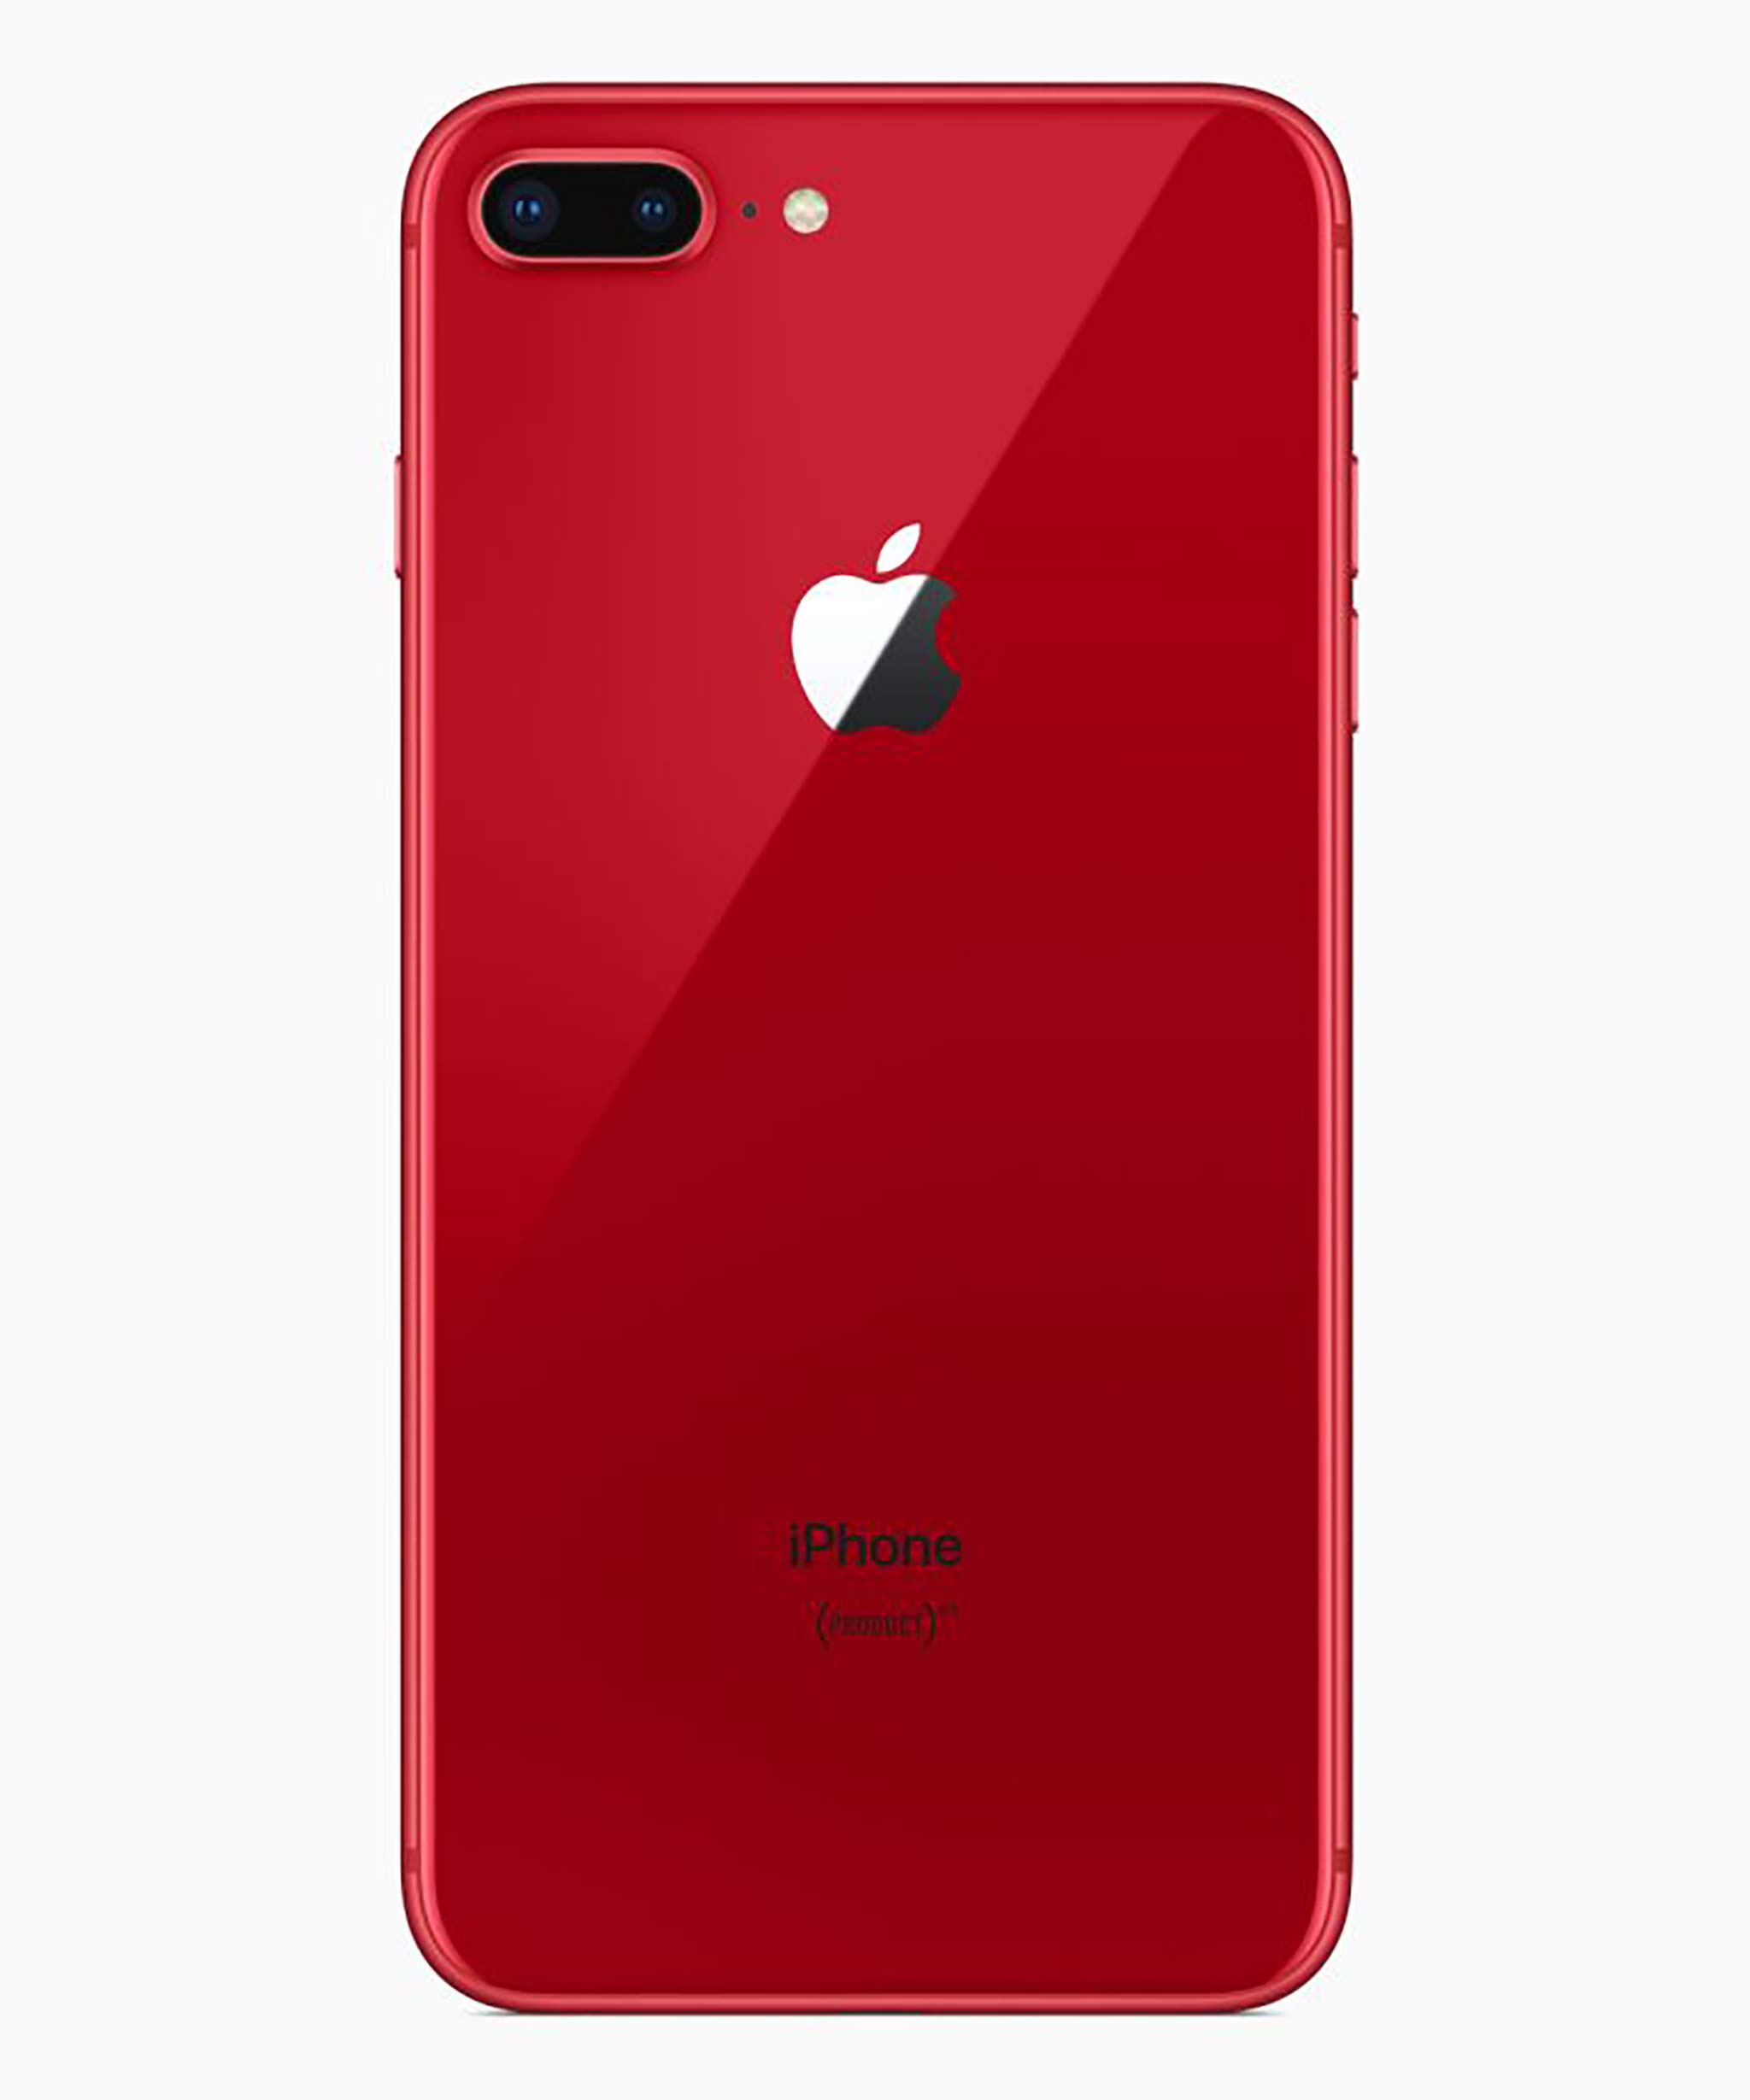 iphone8plus-product-red_back_041018.jpg